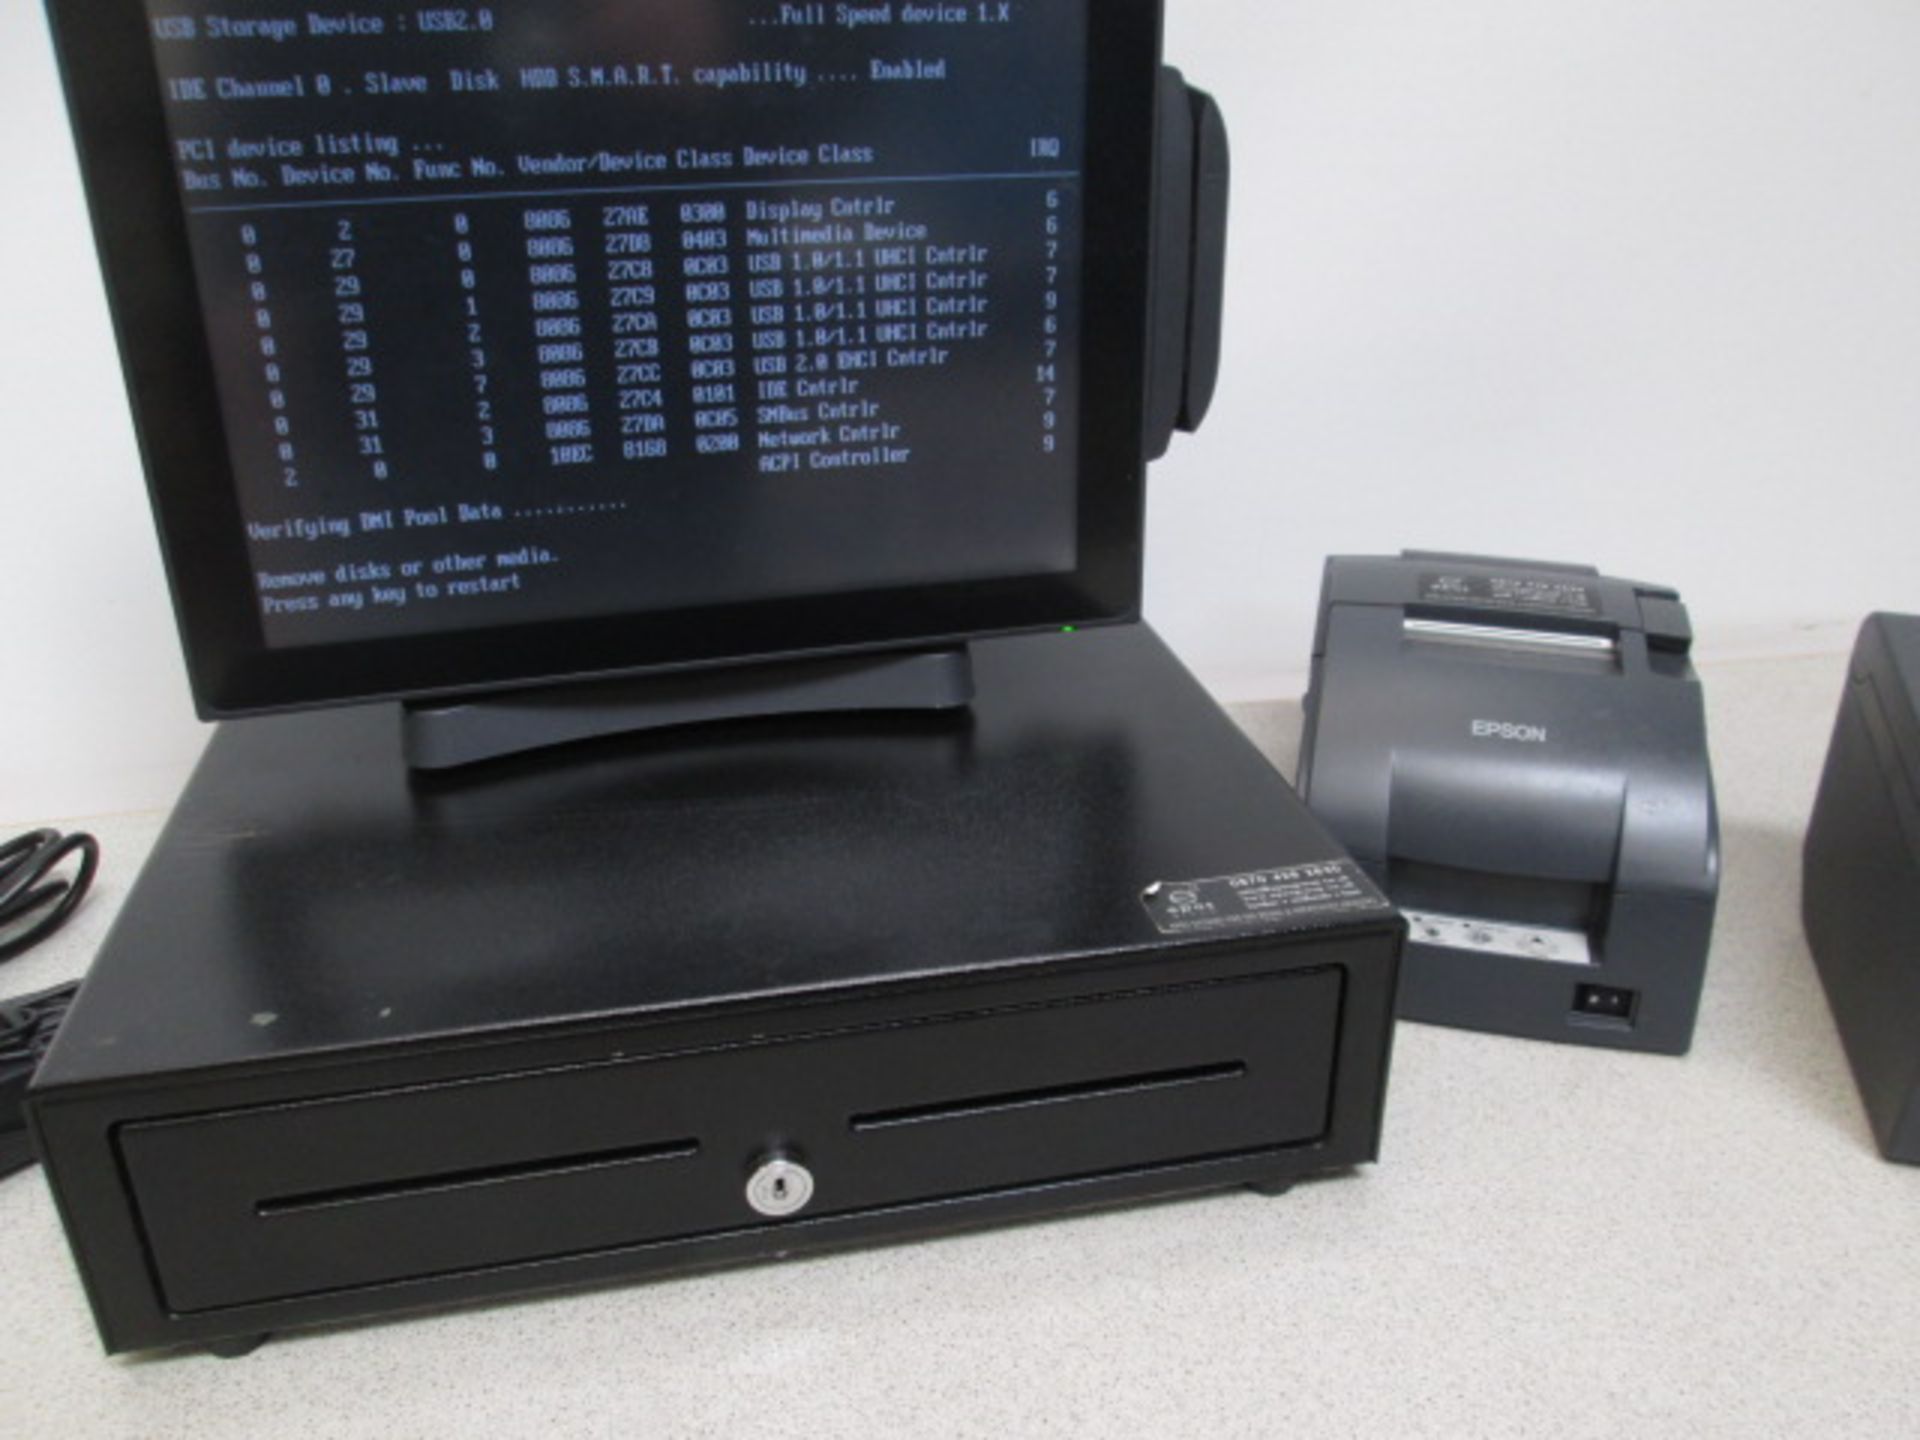 Epos System to Include: J2 POS Terminal with Magnetic Swipe Reader, Epson - Model 188B Receipt - Image 3 of 5